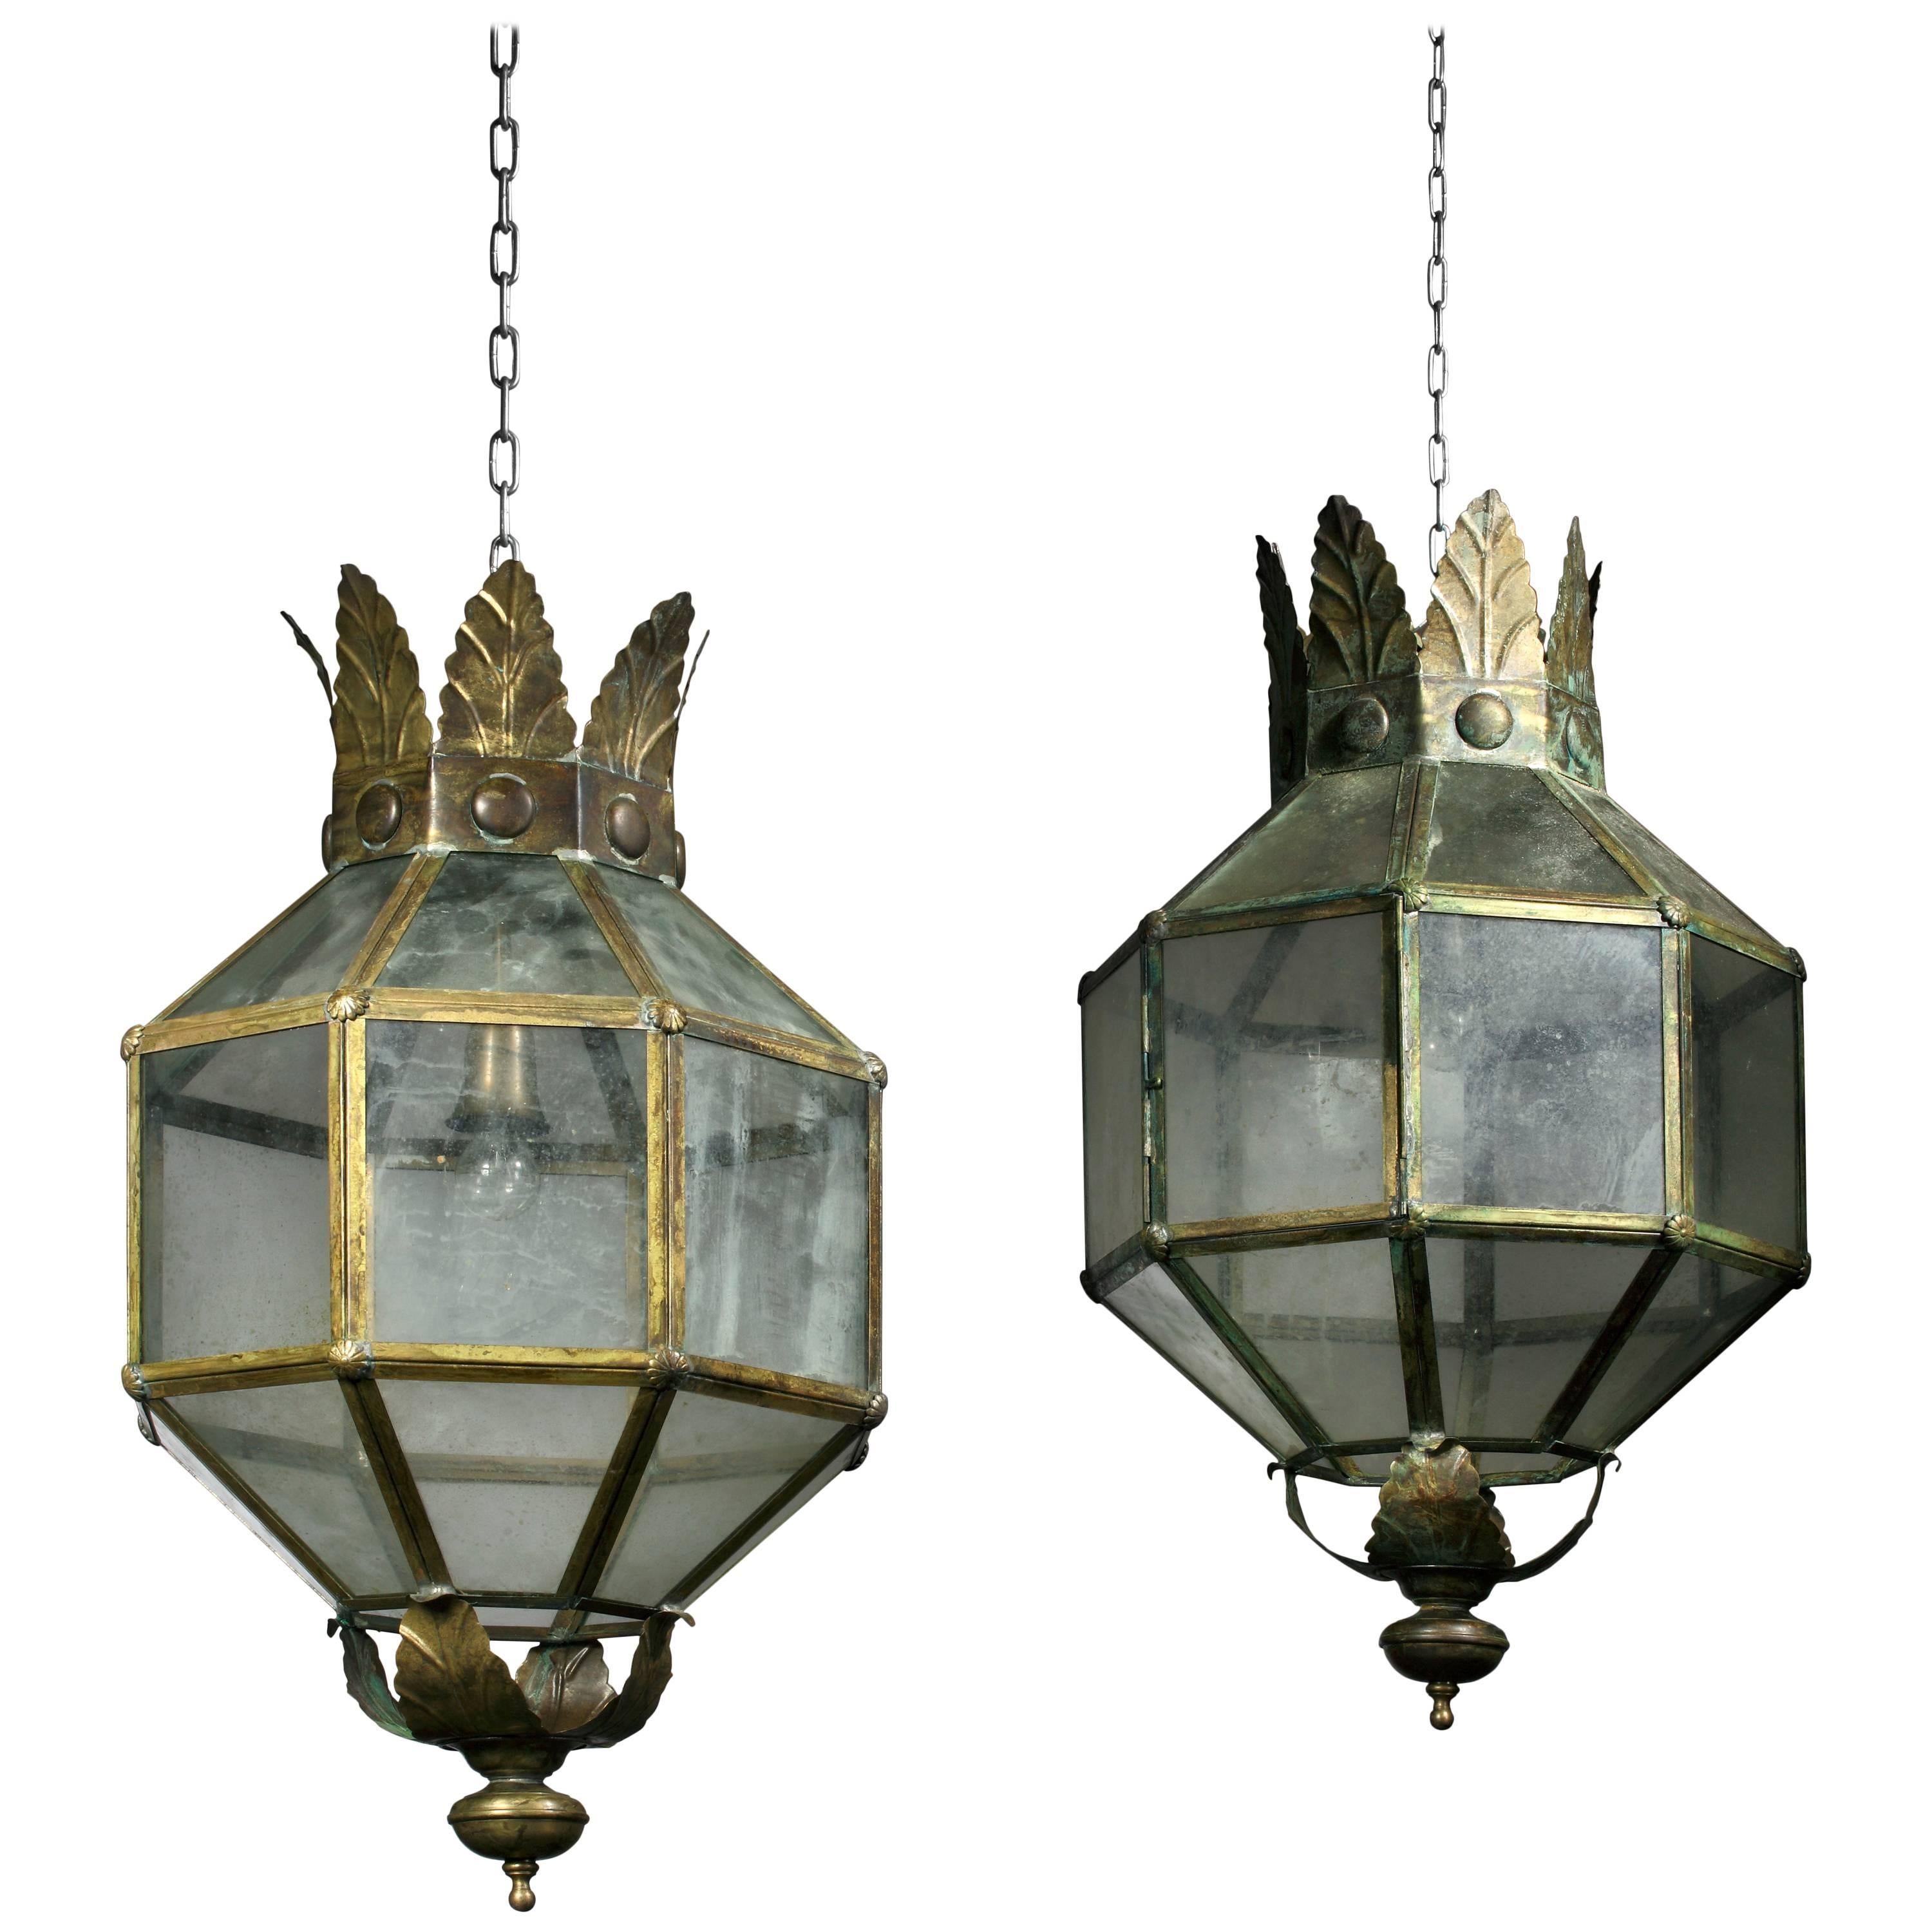 A pair of large aged copper and glazed octagonal section lanterns